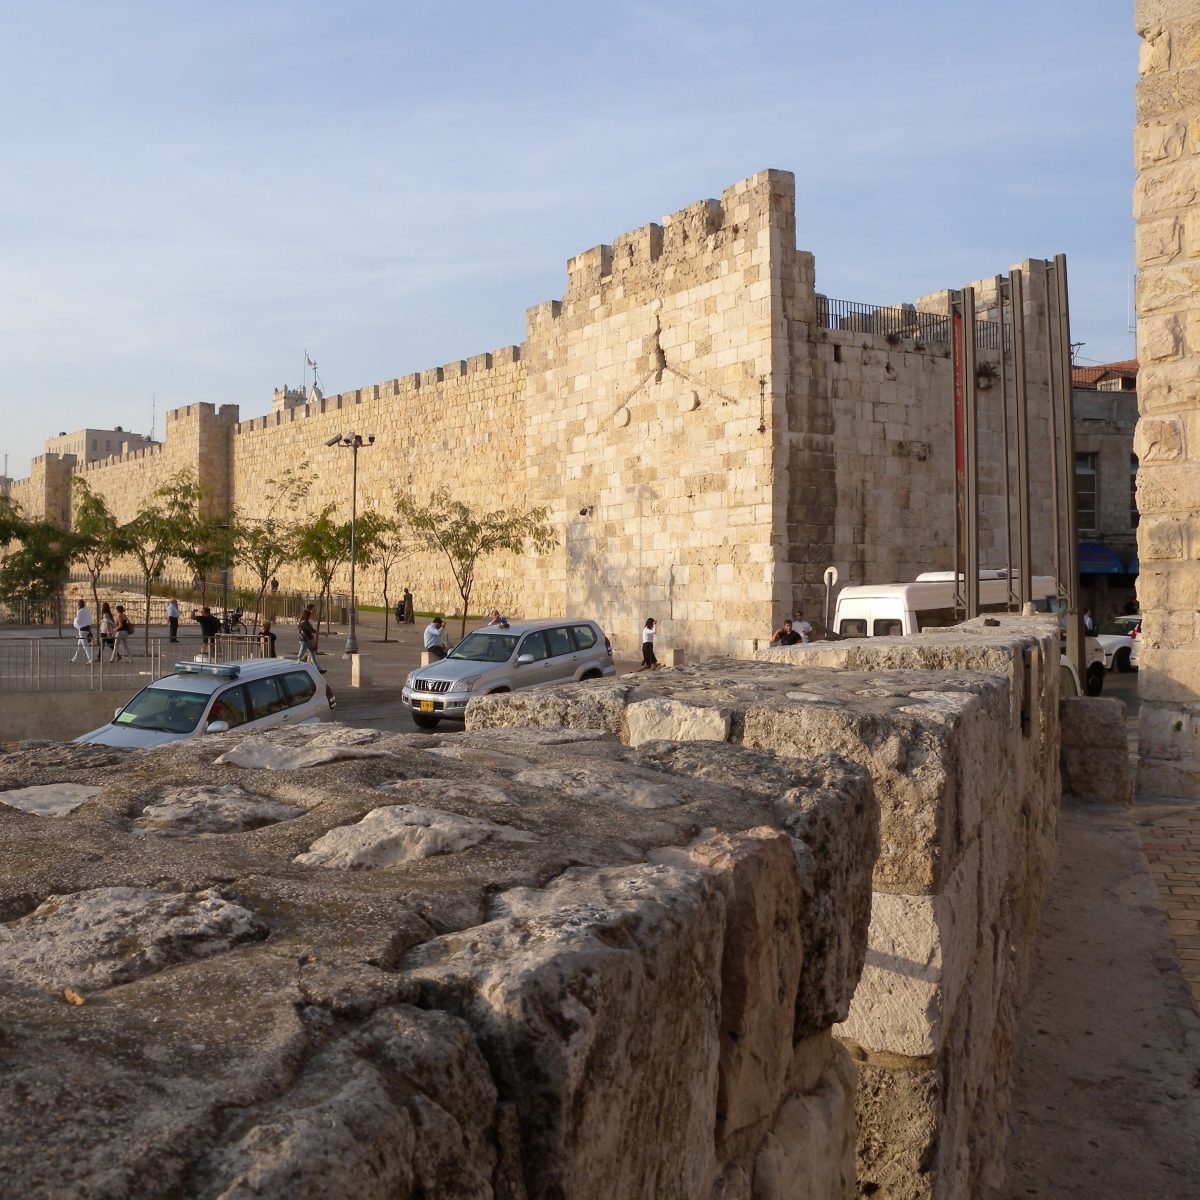 The entrance to the Old City of Jerusalem at Jaffa Gate